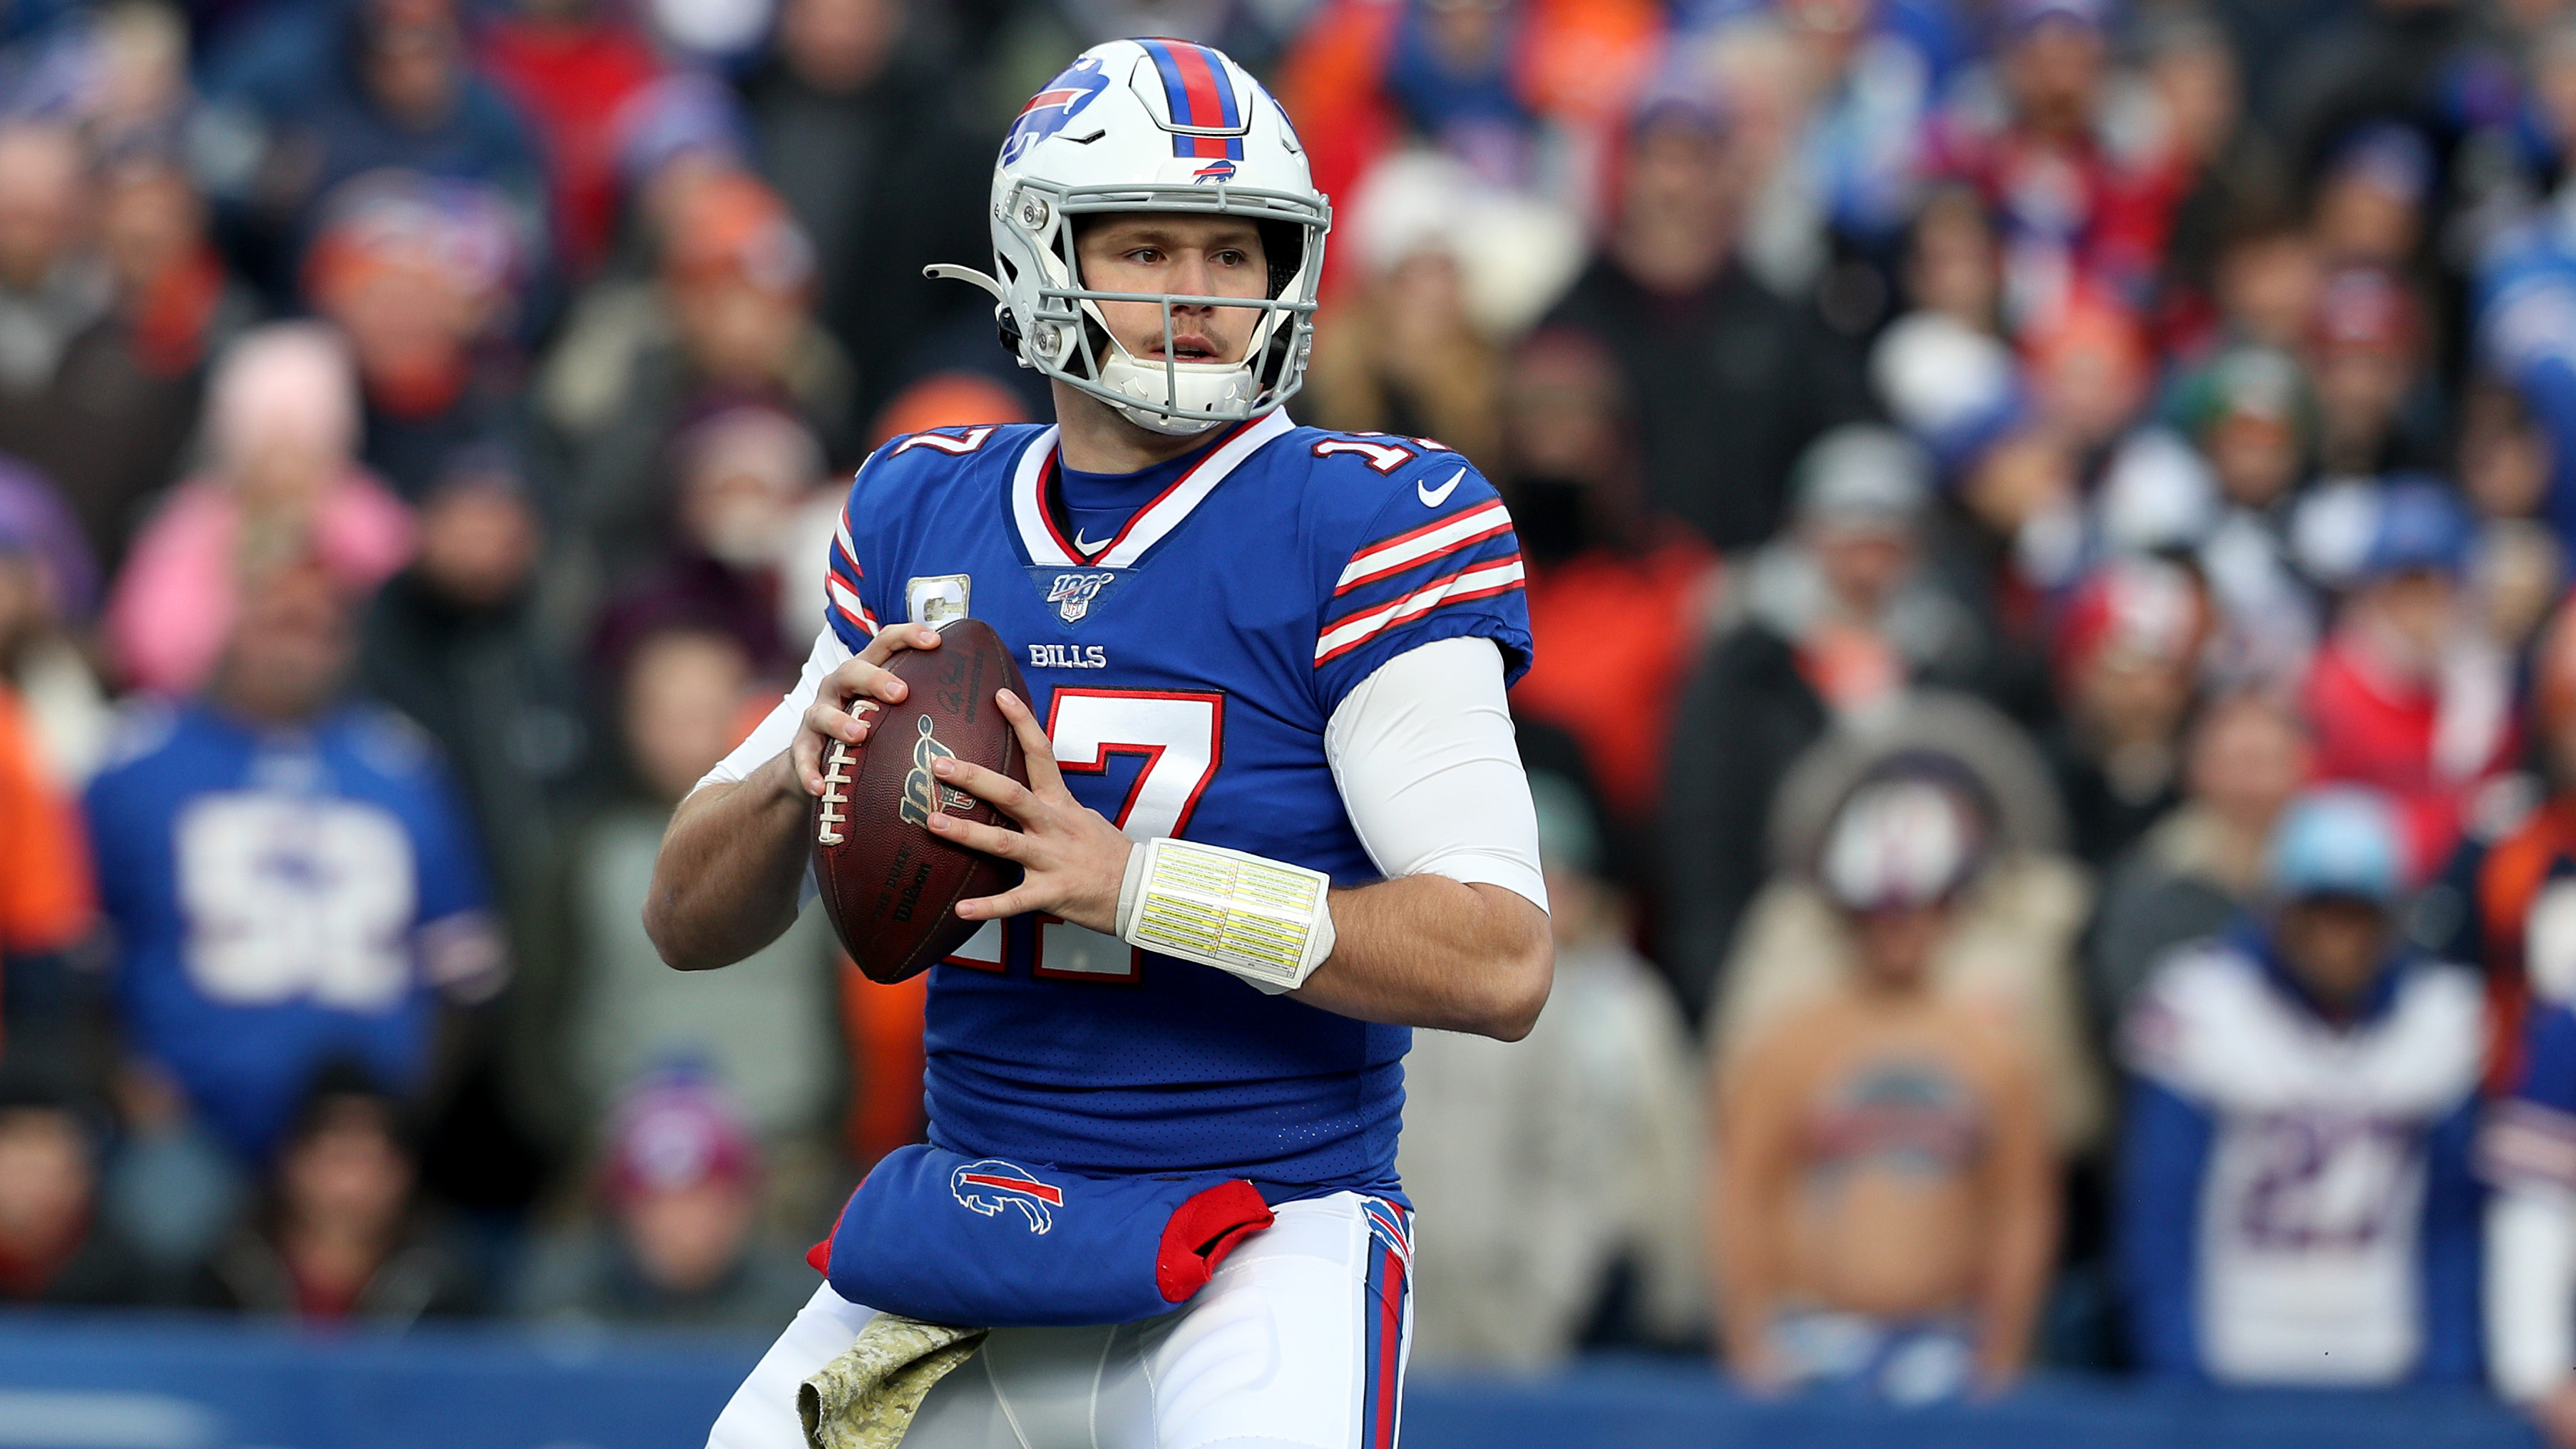 Josh Allen and the Bills start their highly-anticipated 2020 season against...